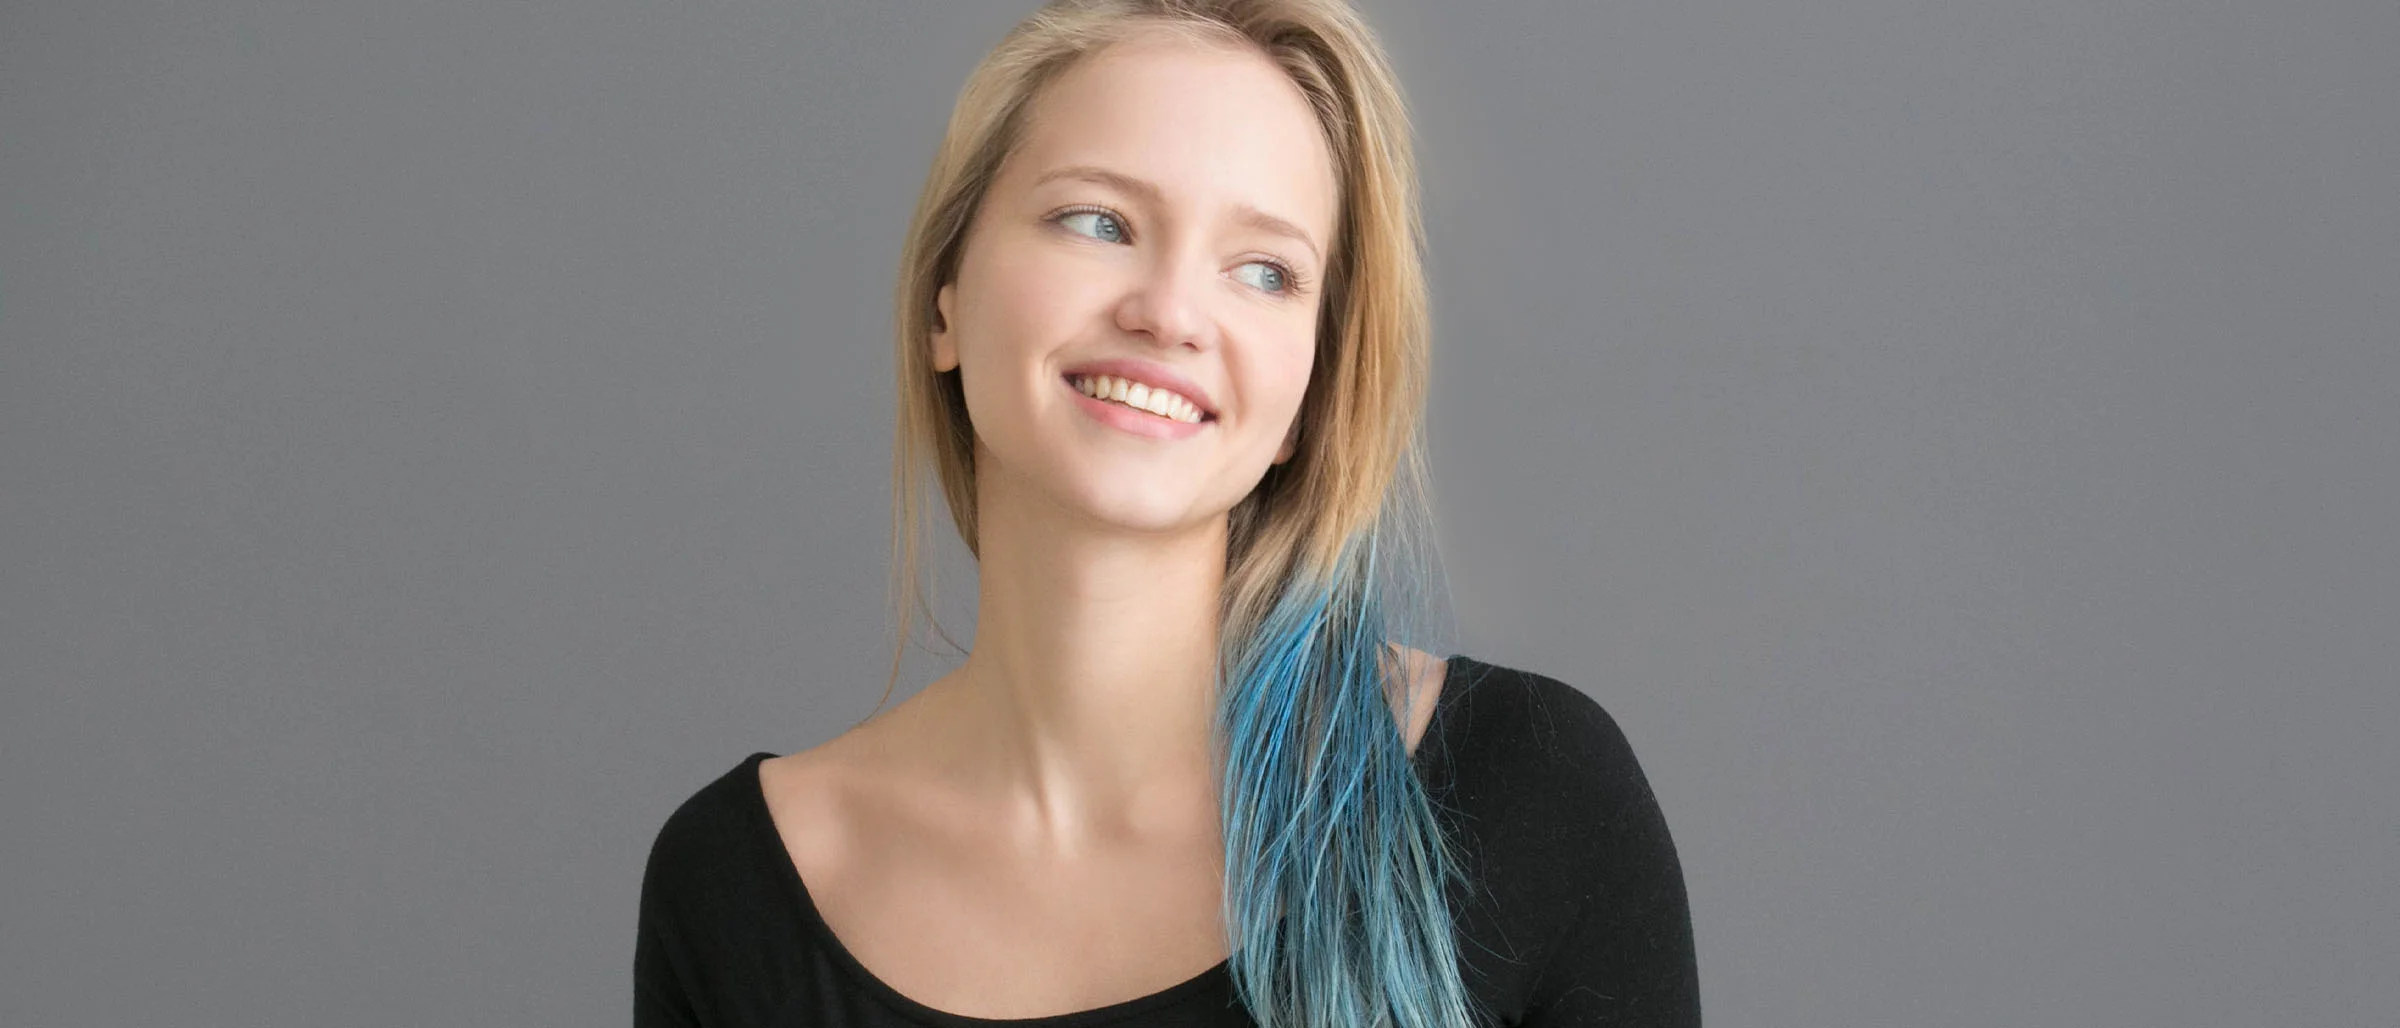 Colored Hair and Dandruff? Not Anymore! Follow These Steps for Beautiful, Flake-Free Hair